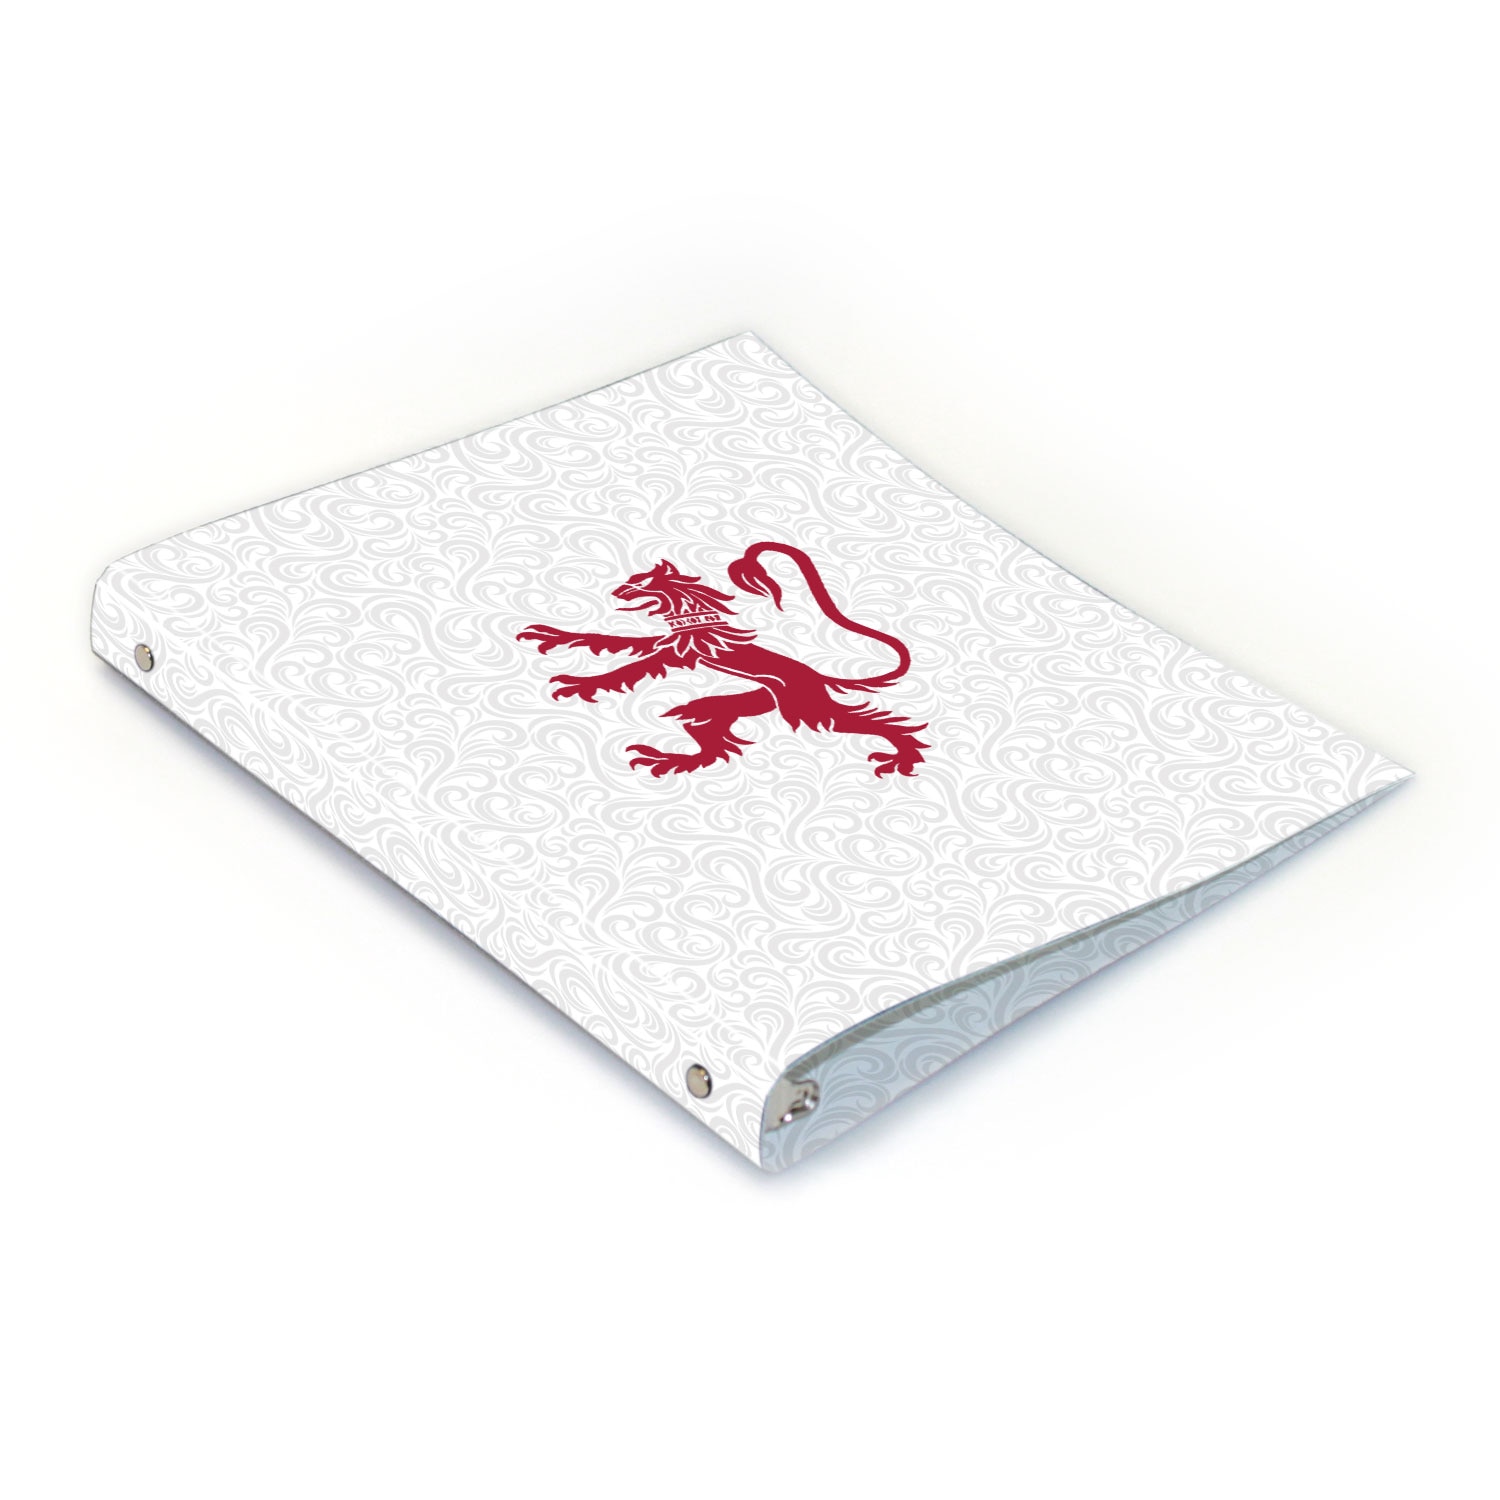 Phillips Exeter Academy Full Color 2 sided Imprinted Flexible 1" Logo 2 Binder 10.5" x 11.5"